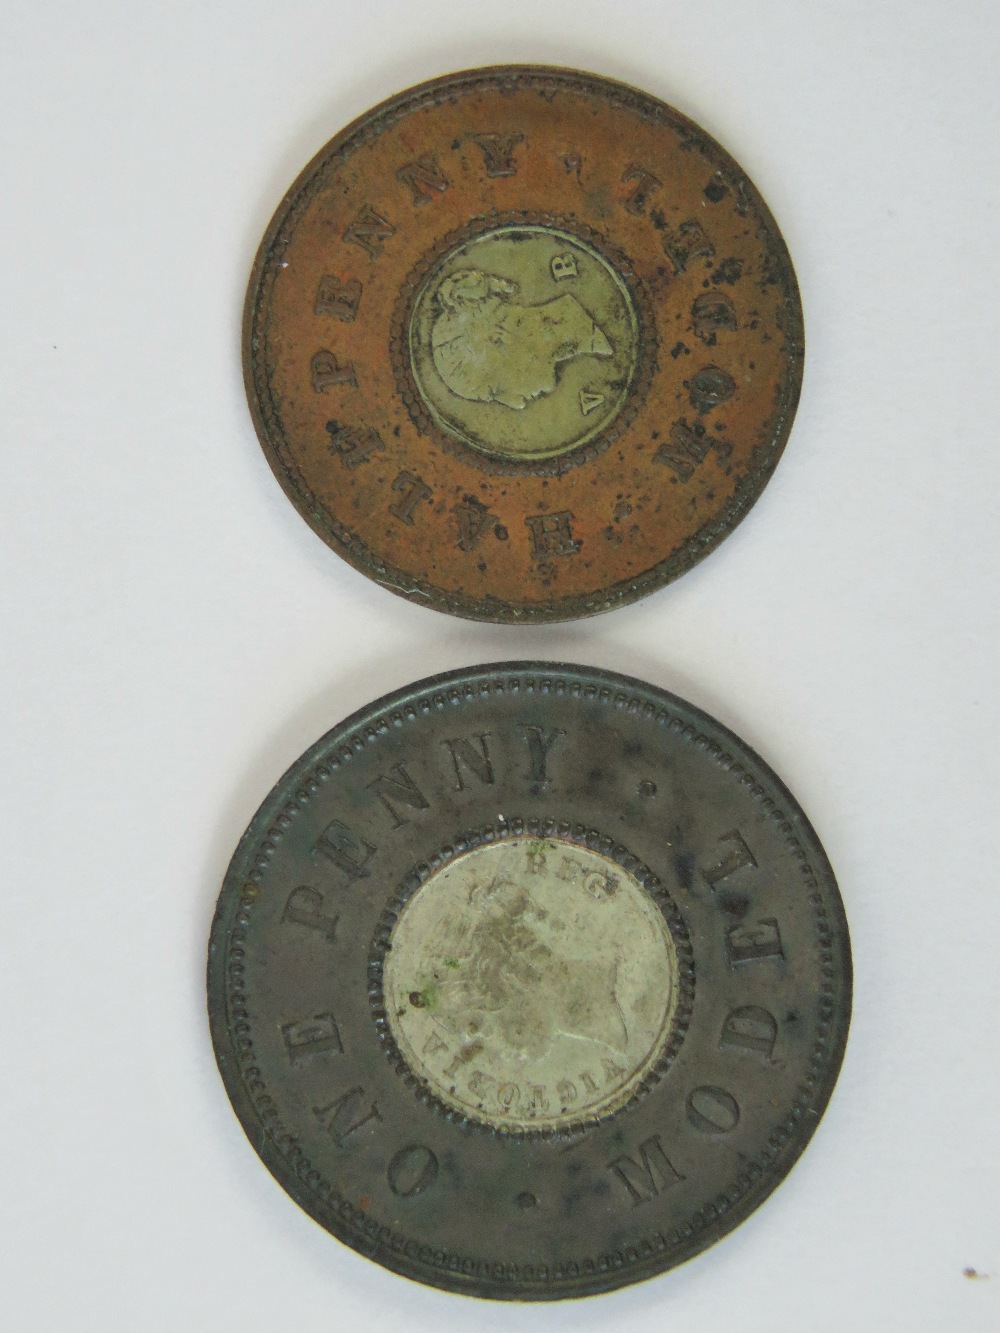 An 1848 Victoria Model 1/2p, and an 1848 Model 1p. Two items.